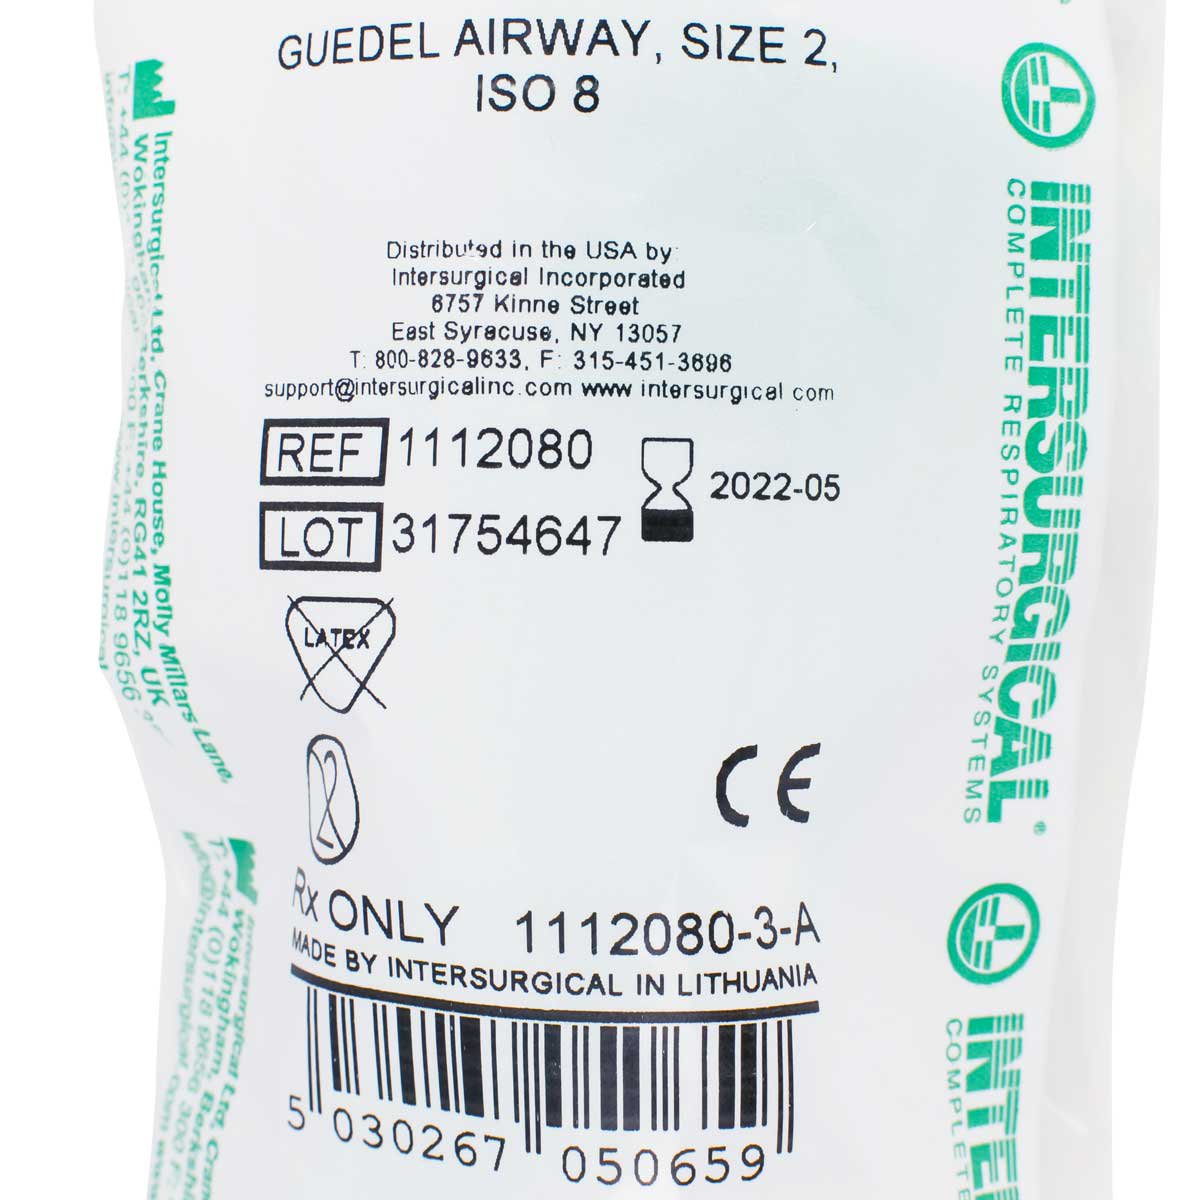 Small Adult Size 2 Guedel Airway packaging